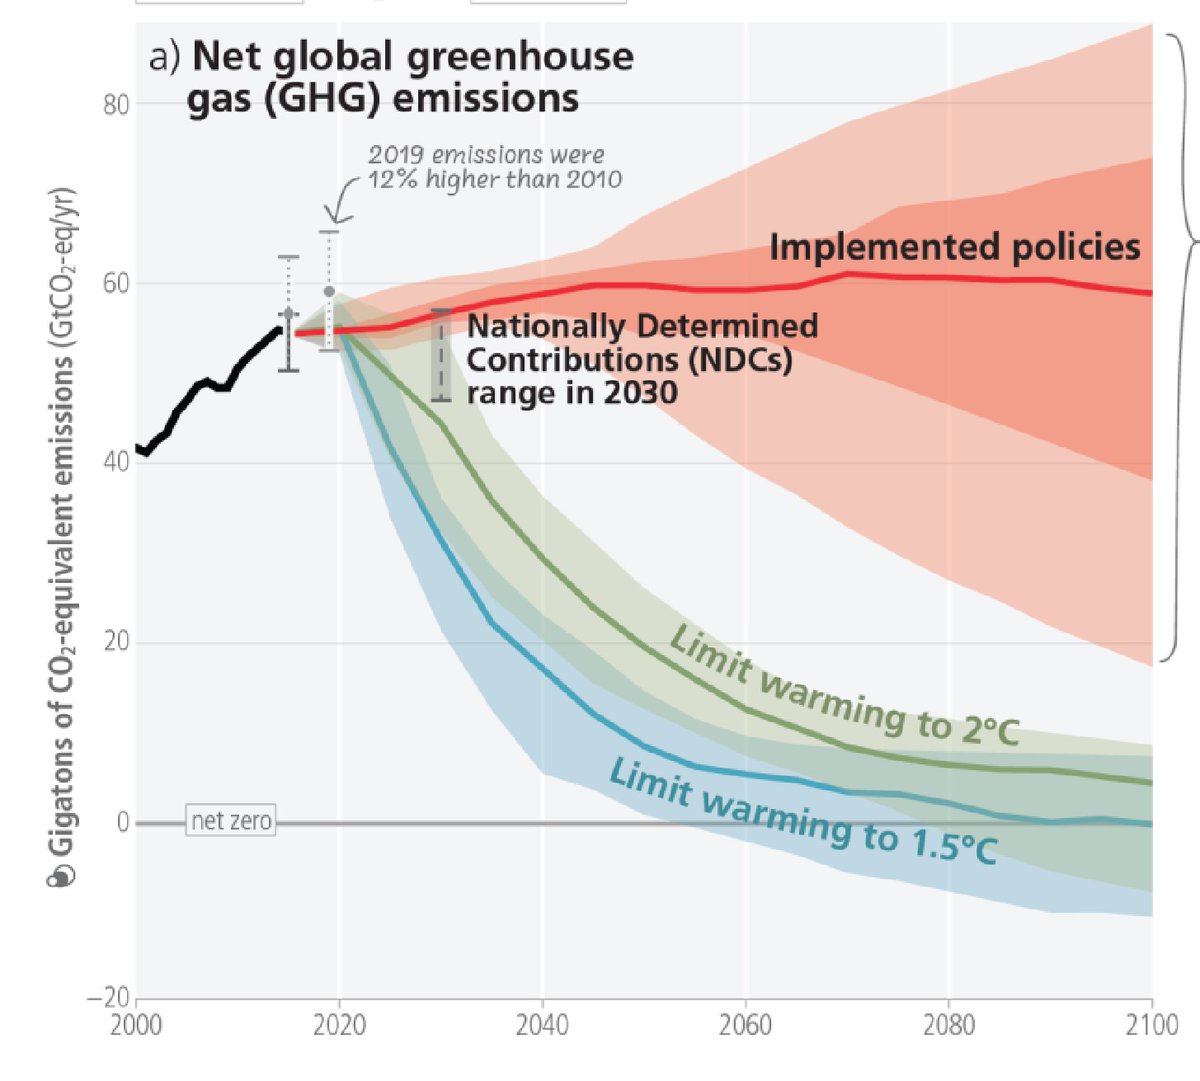 Business-as-usual, the current hopeless climate targets, will take heating up to 3.2°C rise by 2100 says the @IPCC_CH. We are currently seeing almost unsustainable disaster levels at 1.1°C. Who is going to take action? Don't rely on anyone but yourself.